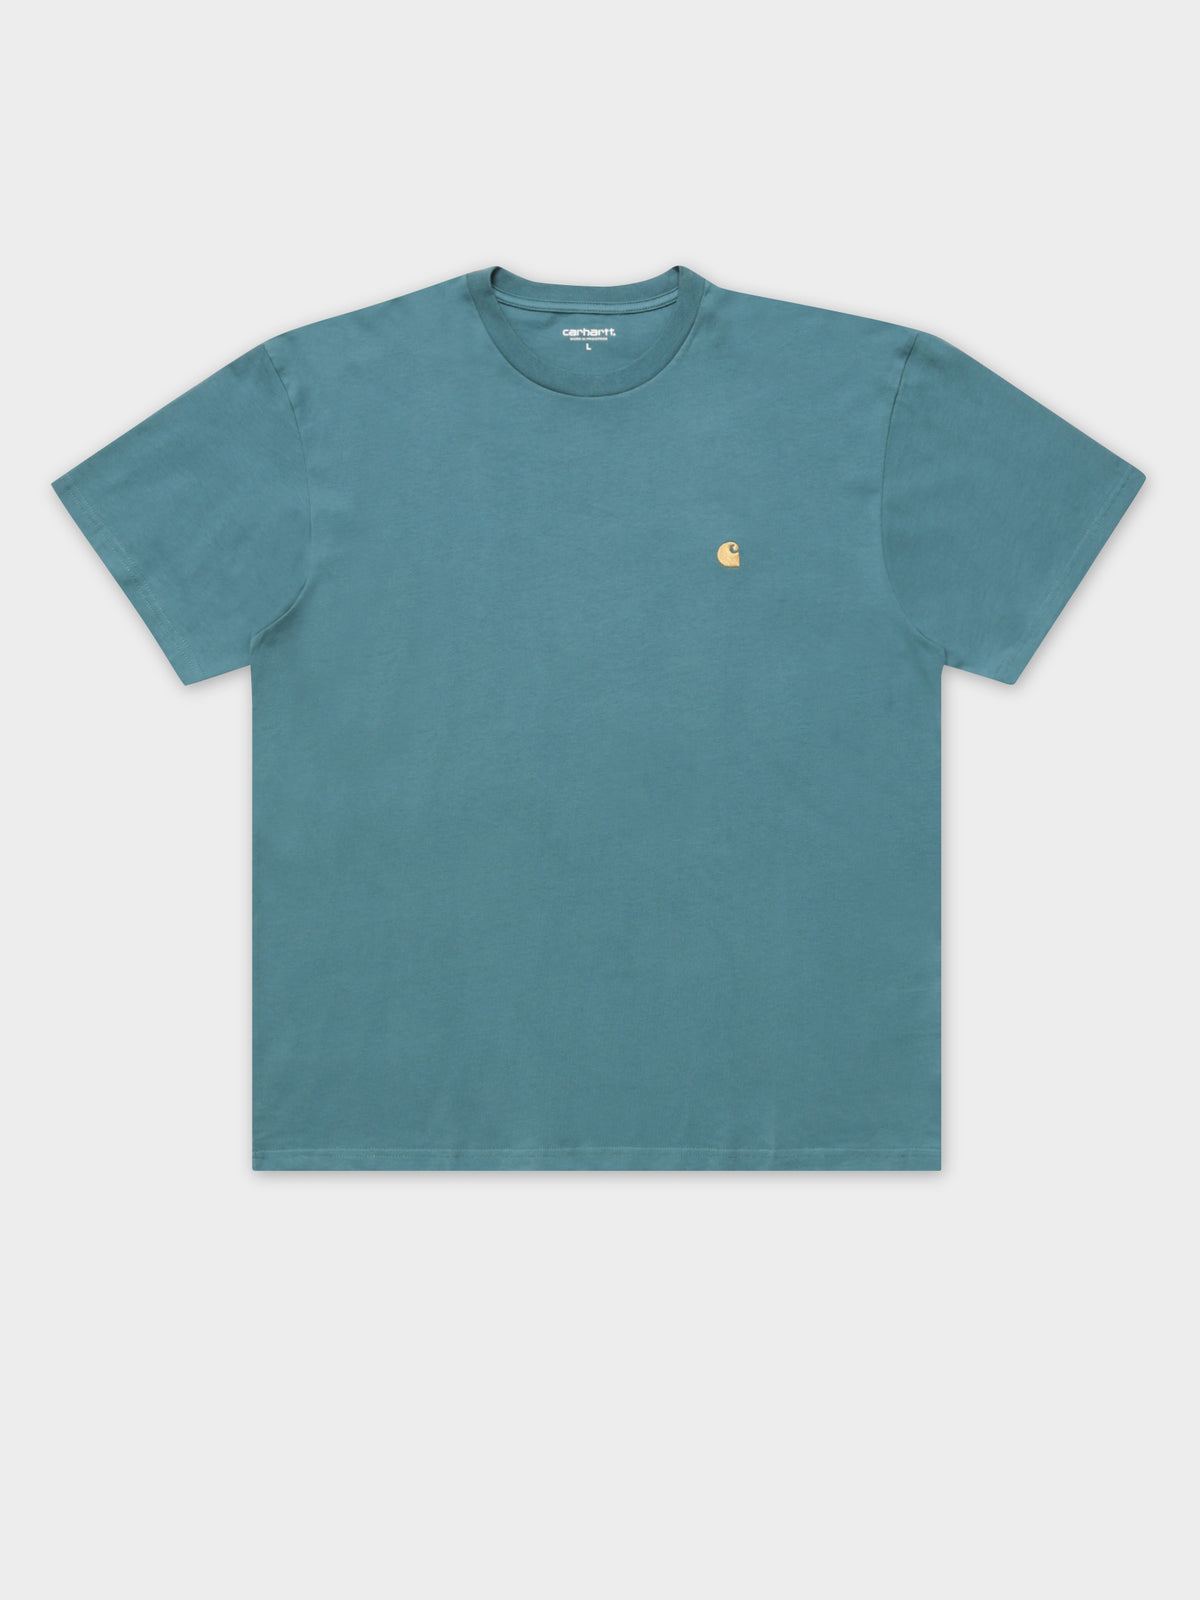 Chase T-Shirt in Hydro &amp; Gold